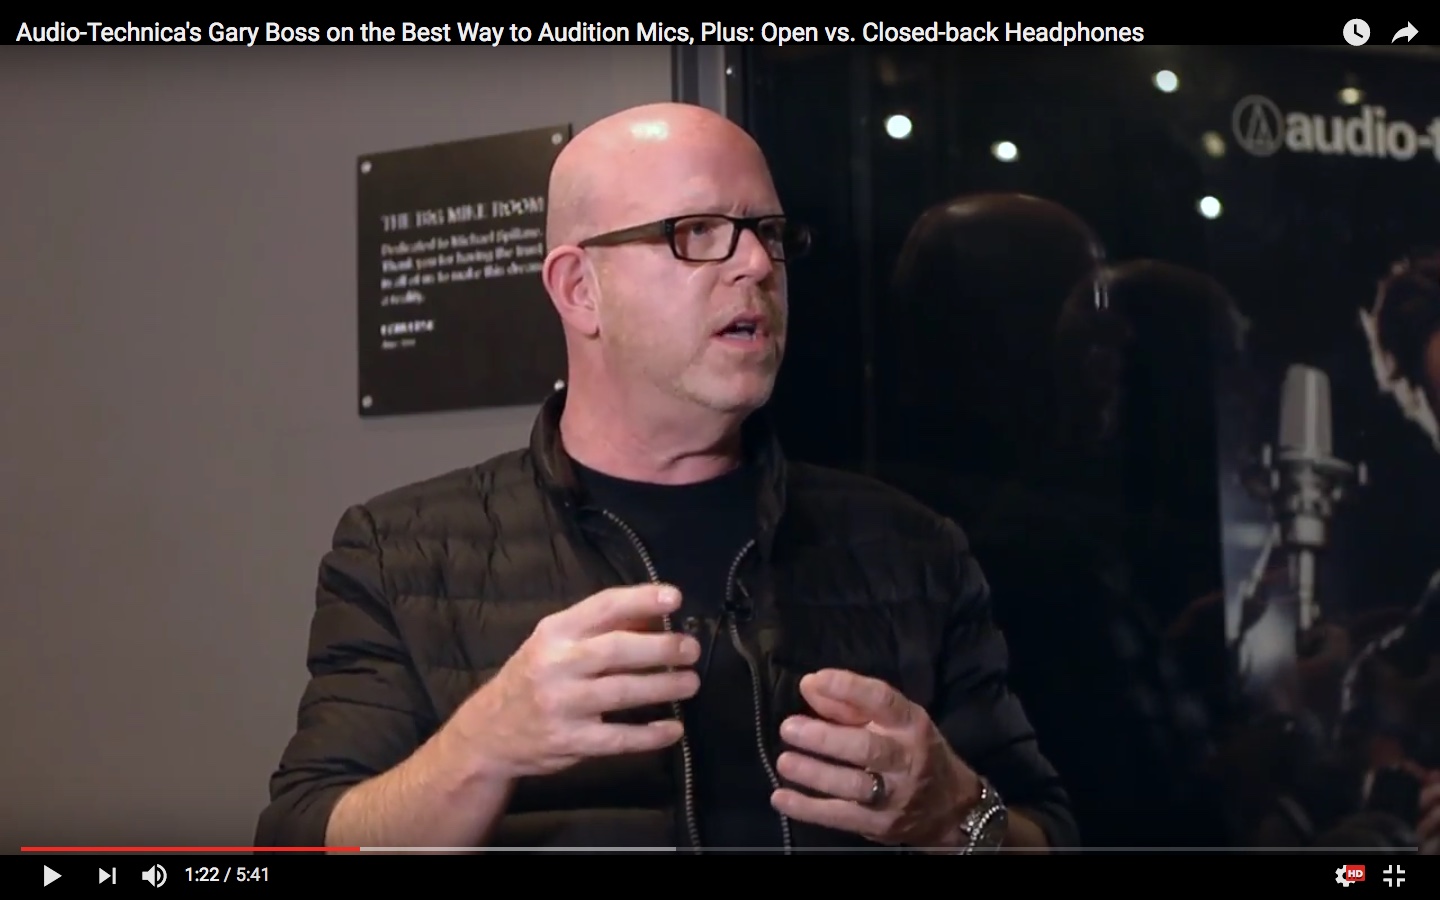 Audio-Technica’s Gary Boss on the Best Way to Audition Mics, Plus: Open vs. Closed-back Headphones